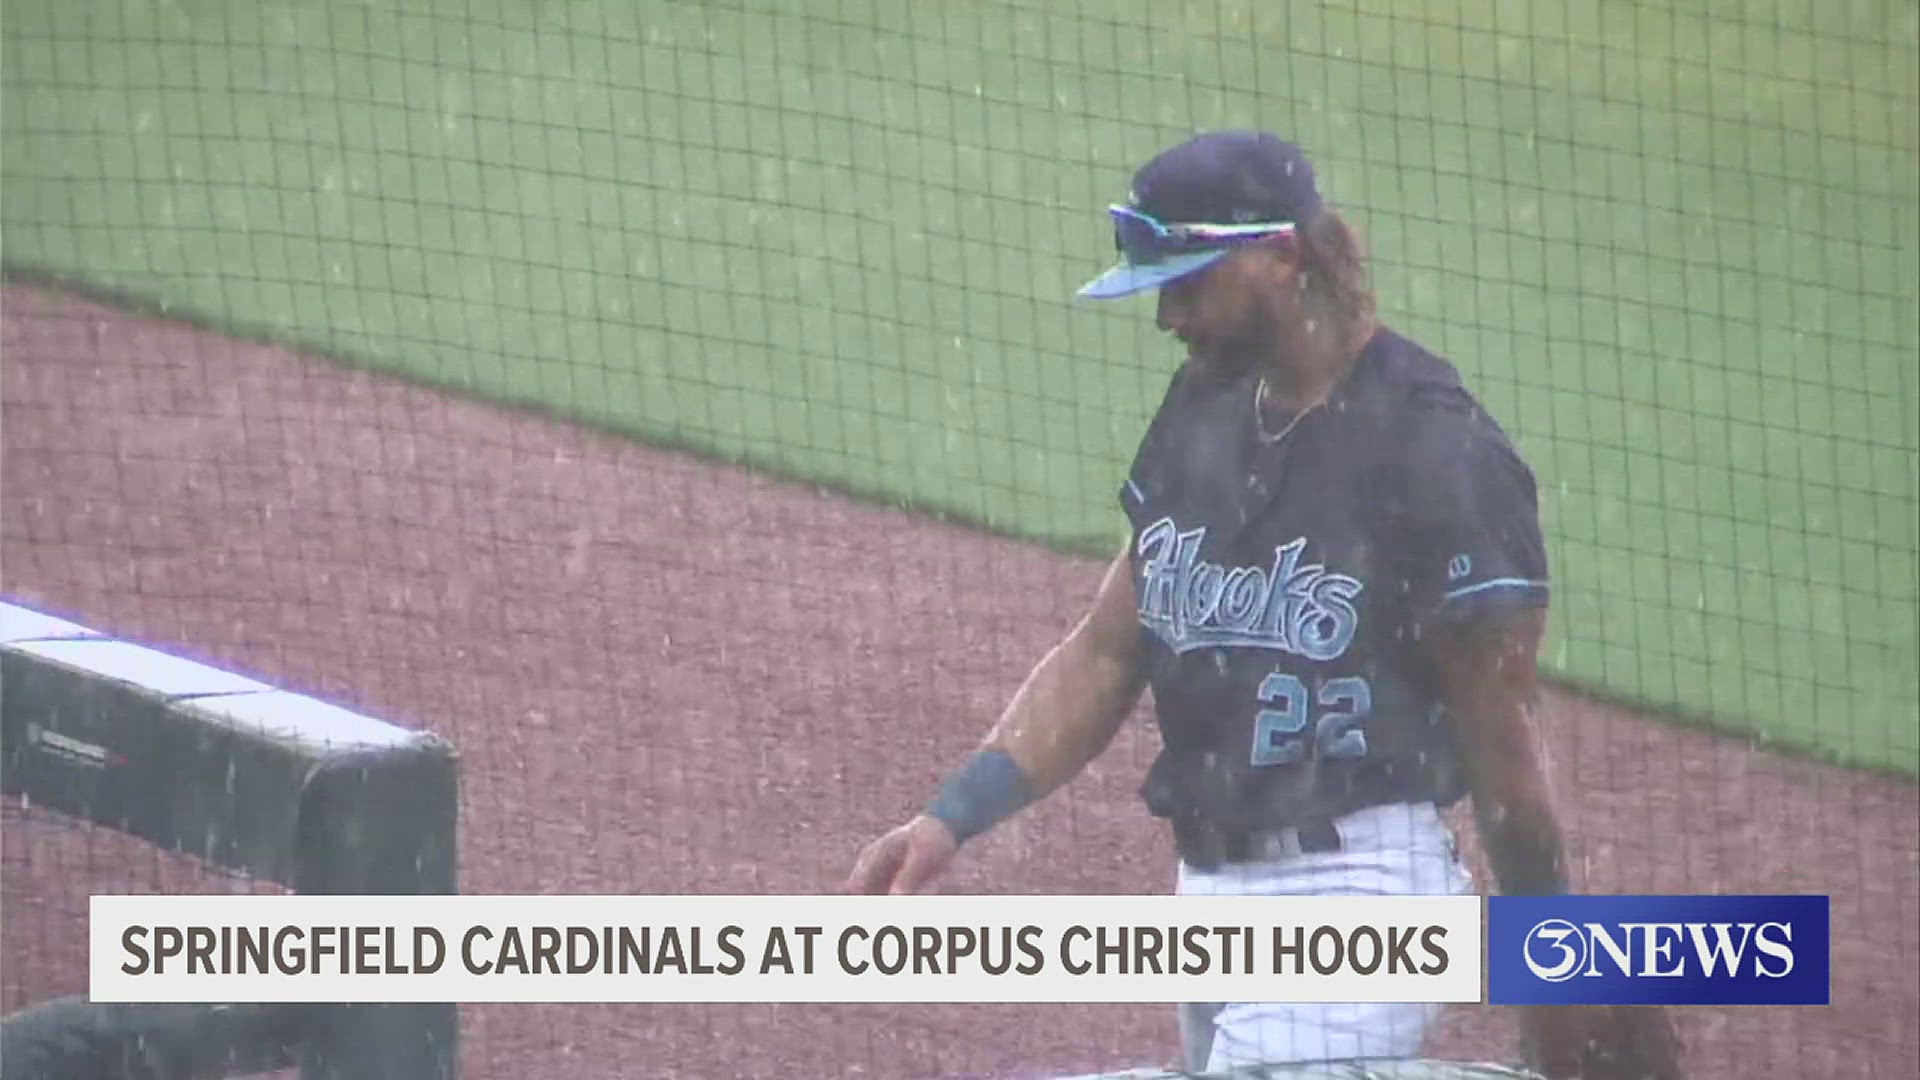 Corpus Christi gave up the first ever no-hitter for Springfield in the first game before the Cardinals rallied to take the second game Thursday.